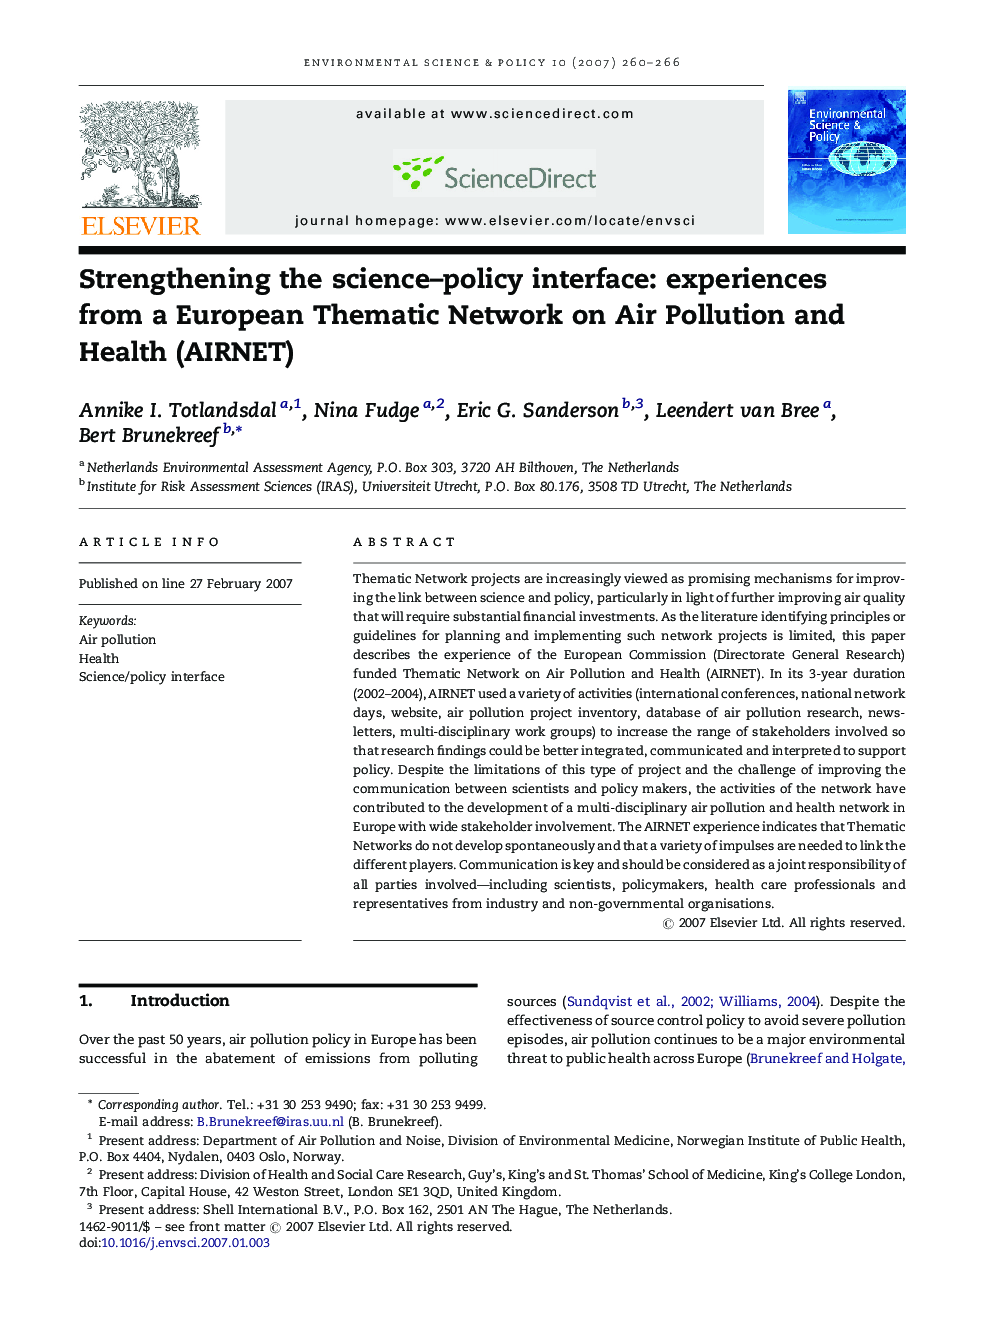 Strengthening the science–policy interface: experiences from a European Thematic Network on Air Pollution and Health (AIRNET)